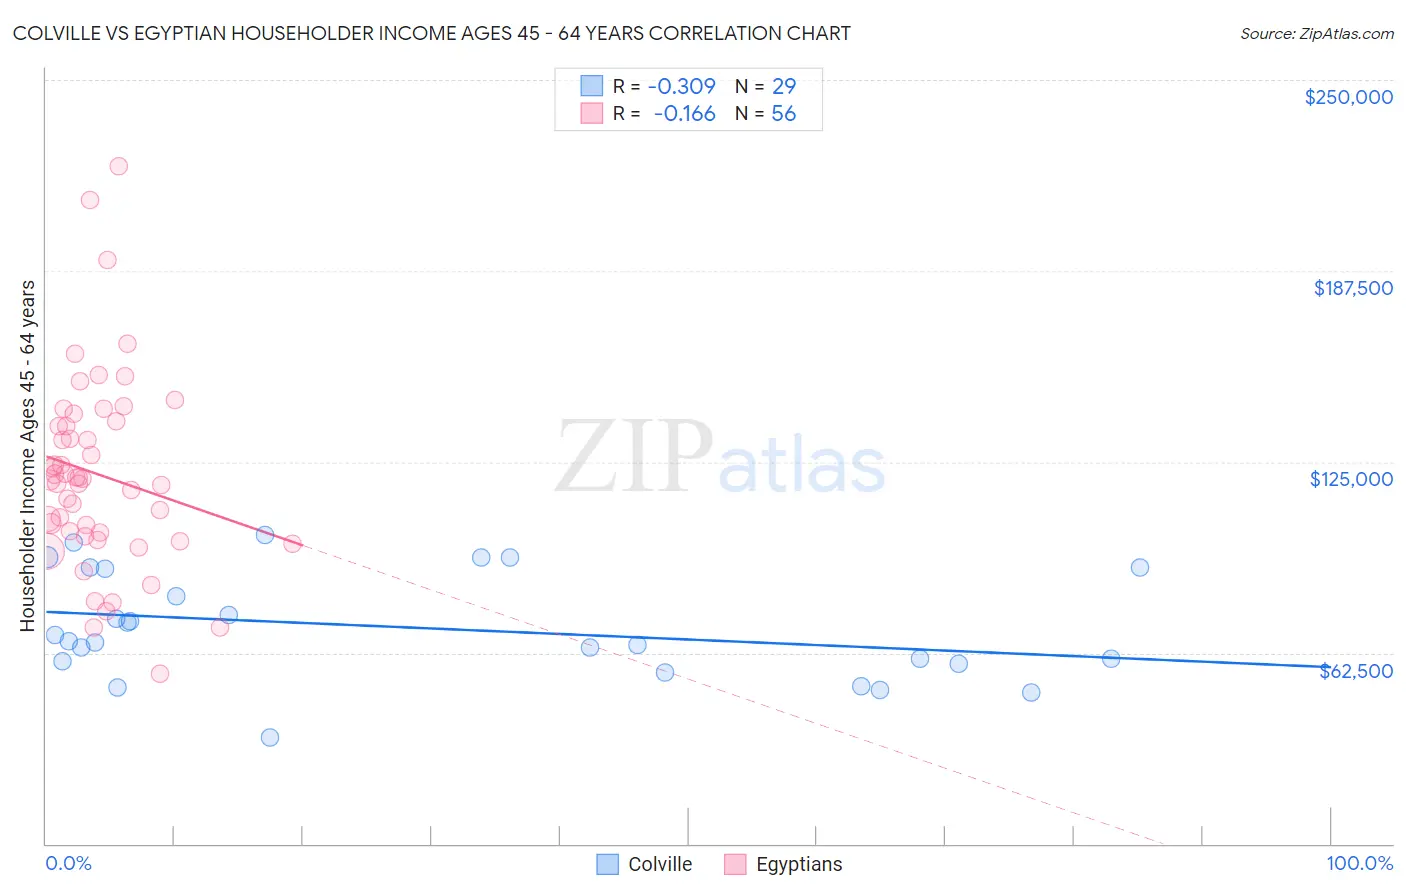 Colville vs Egyptian Householder Income Ages 45 - 64 years